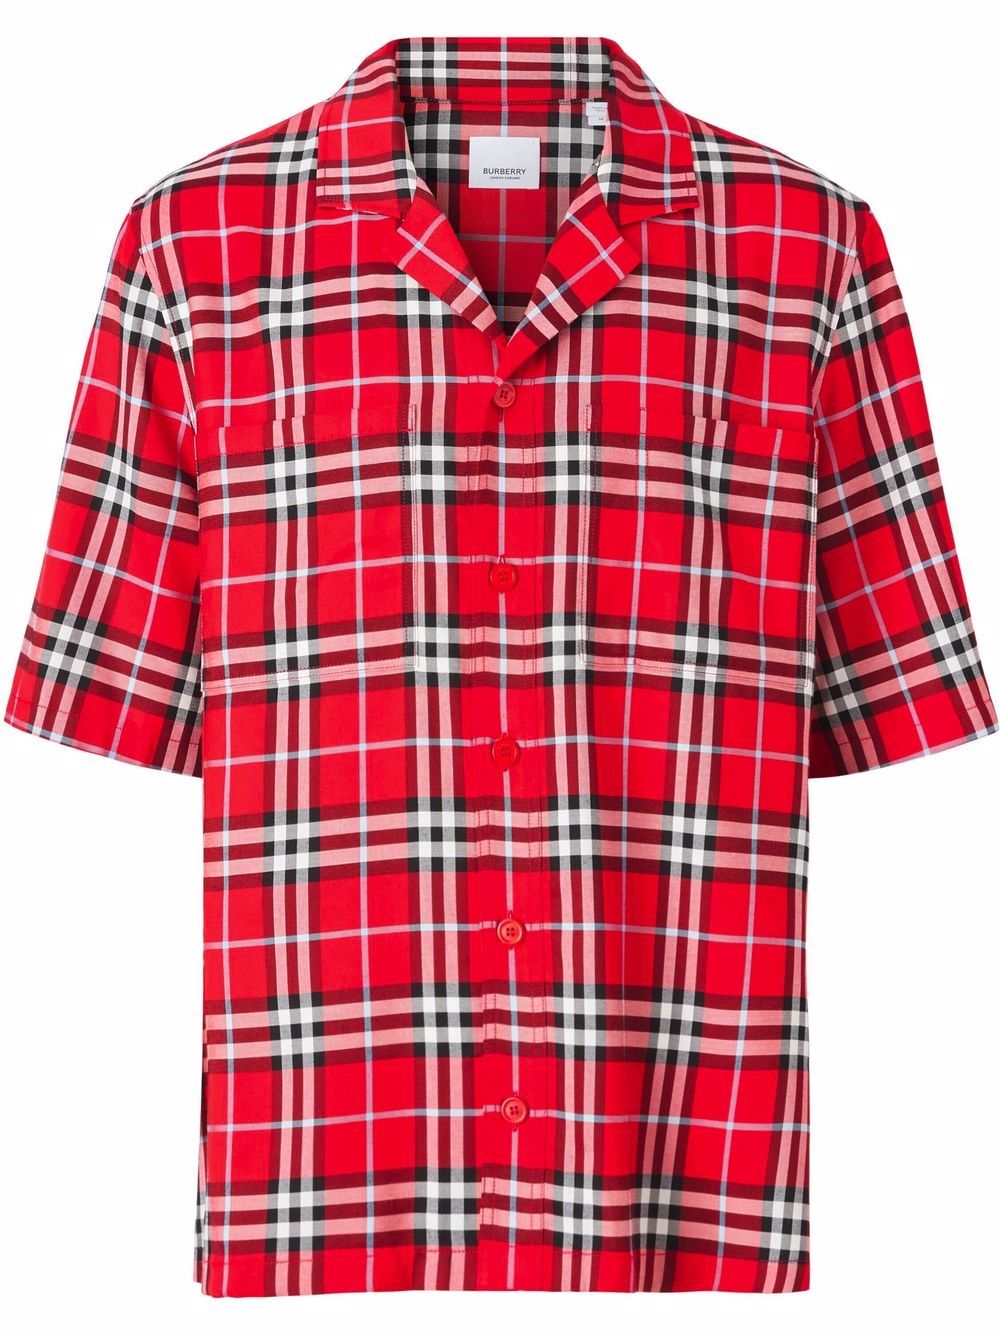 Red/black/white cotton short-sleeve checked shirt